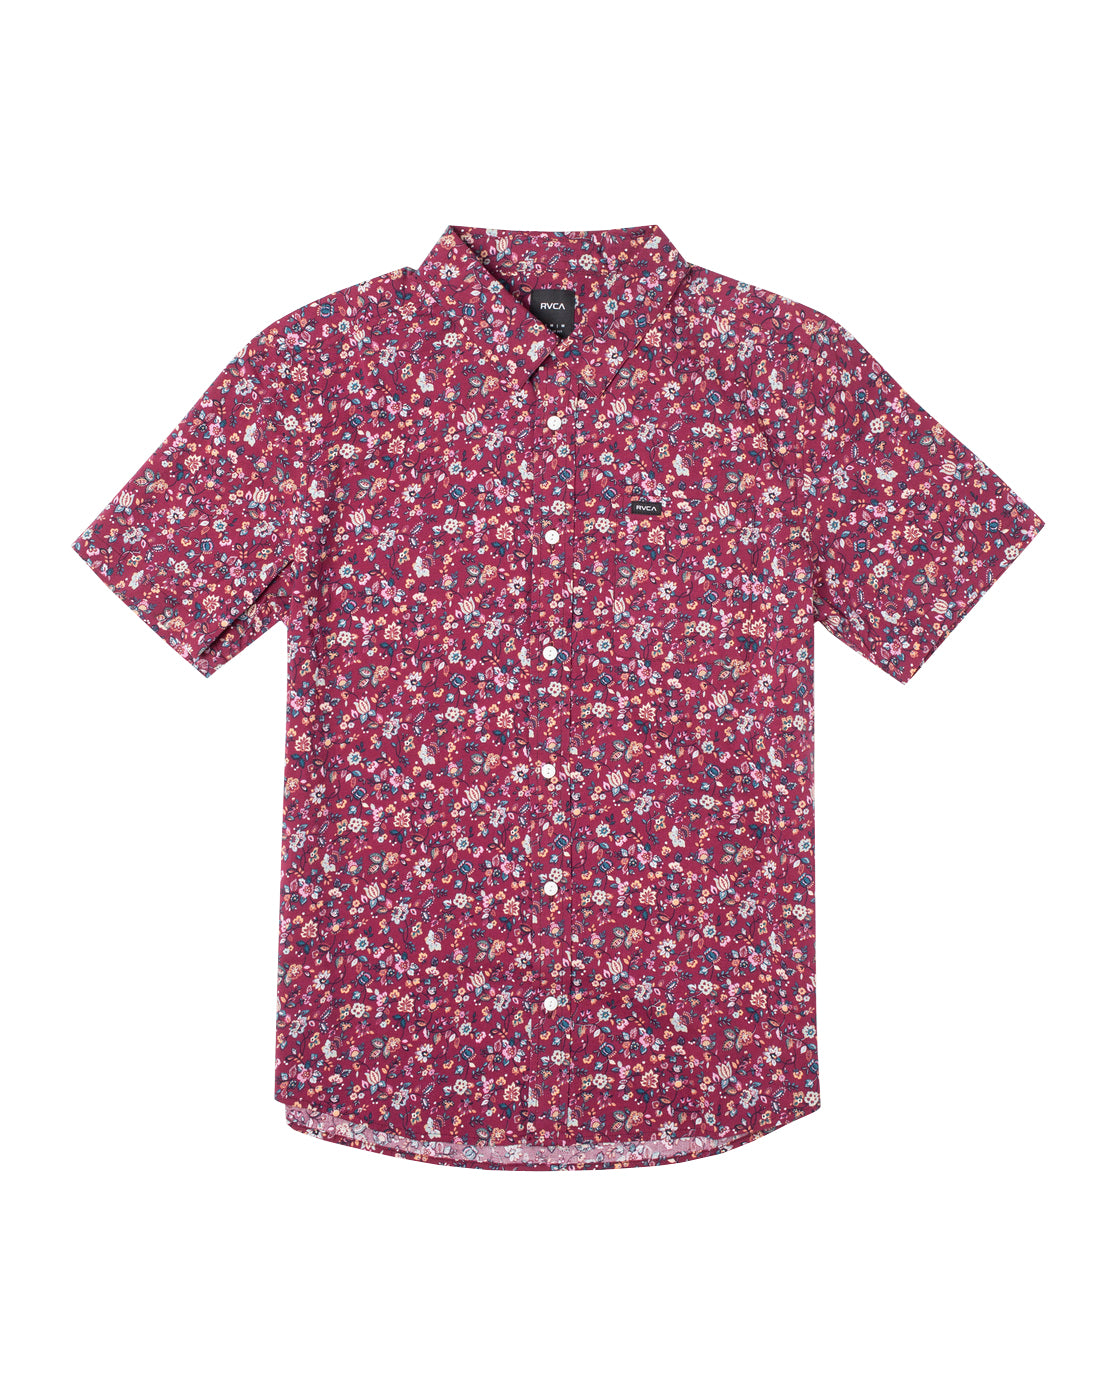 RVCA Justice Floral SS Woven Tee OXR XL